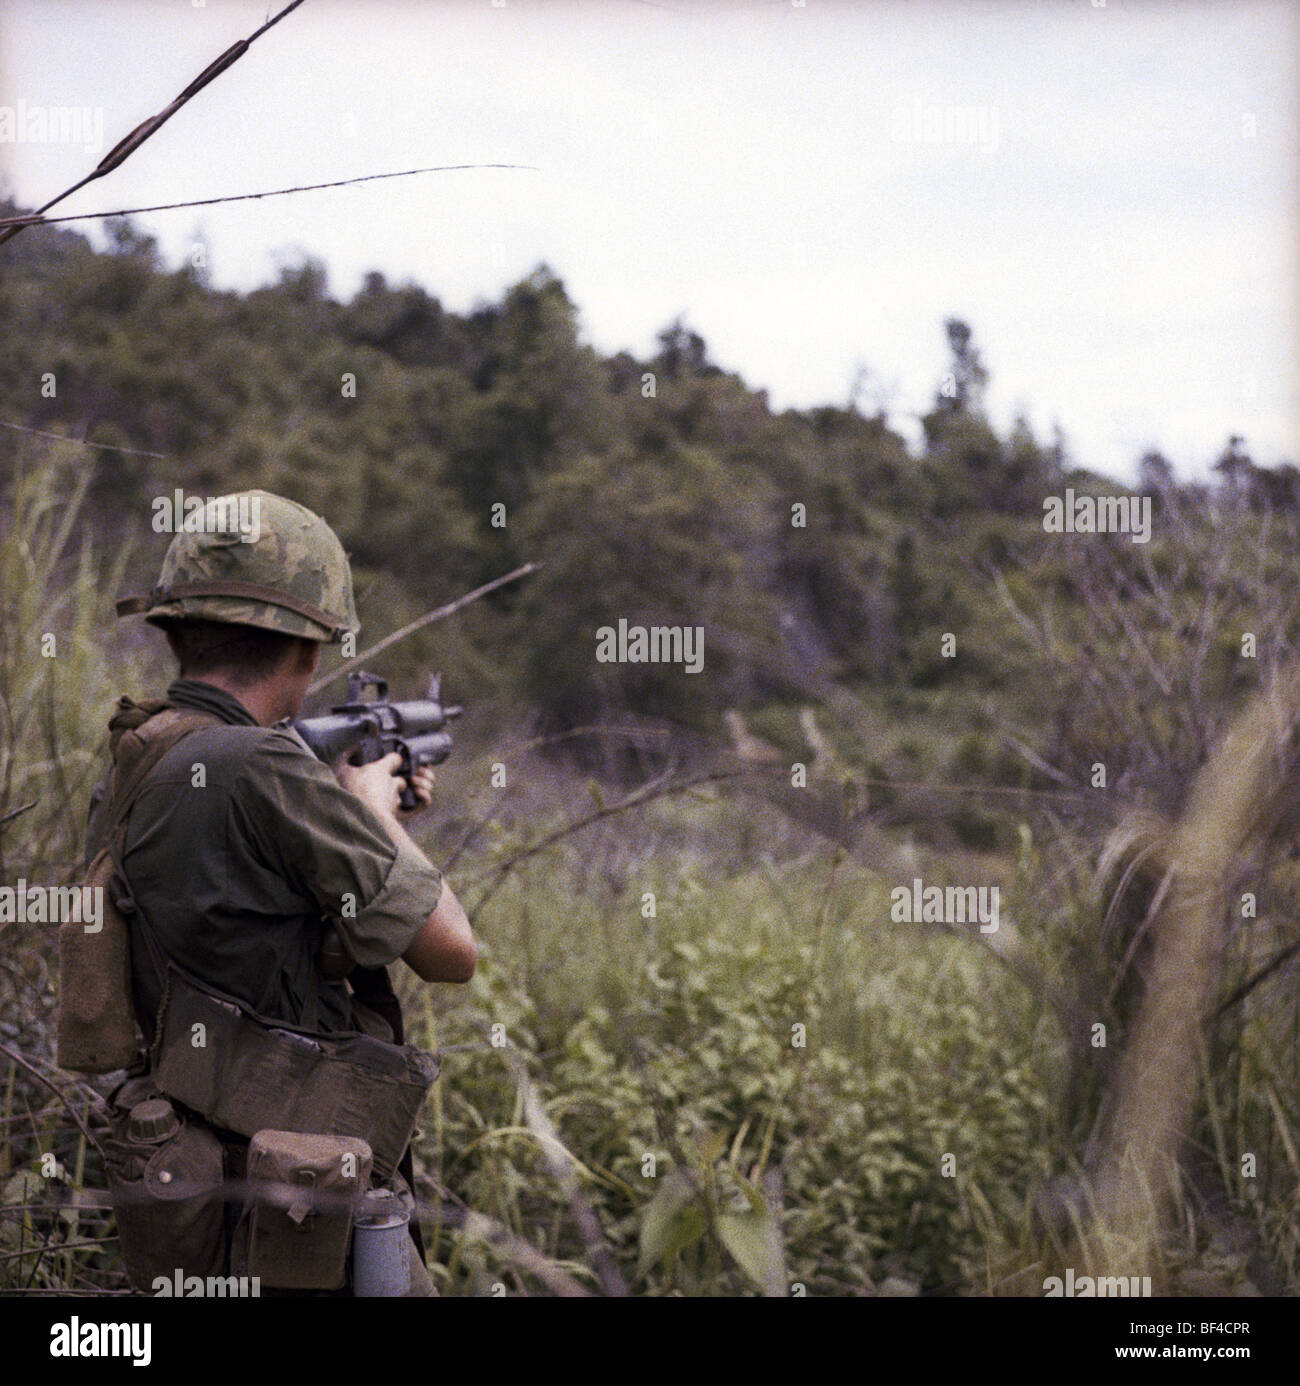 An infantryman of B Troop, 1st Squadron, 9th Cavalry fires an M16 at a jungle target during the Vietnam War in 1967. Stock Photo